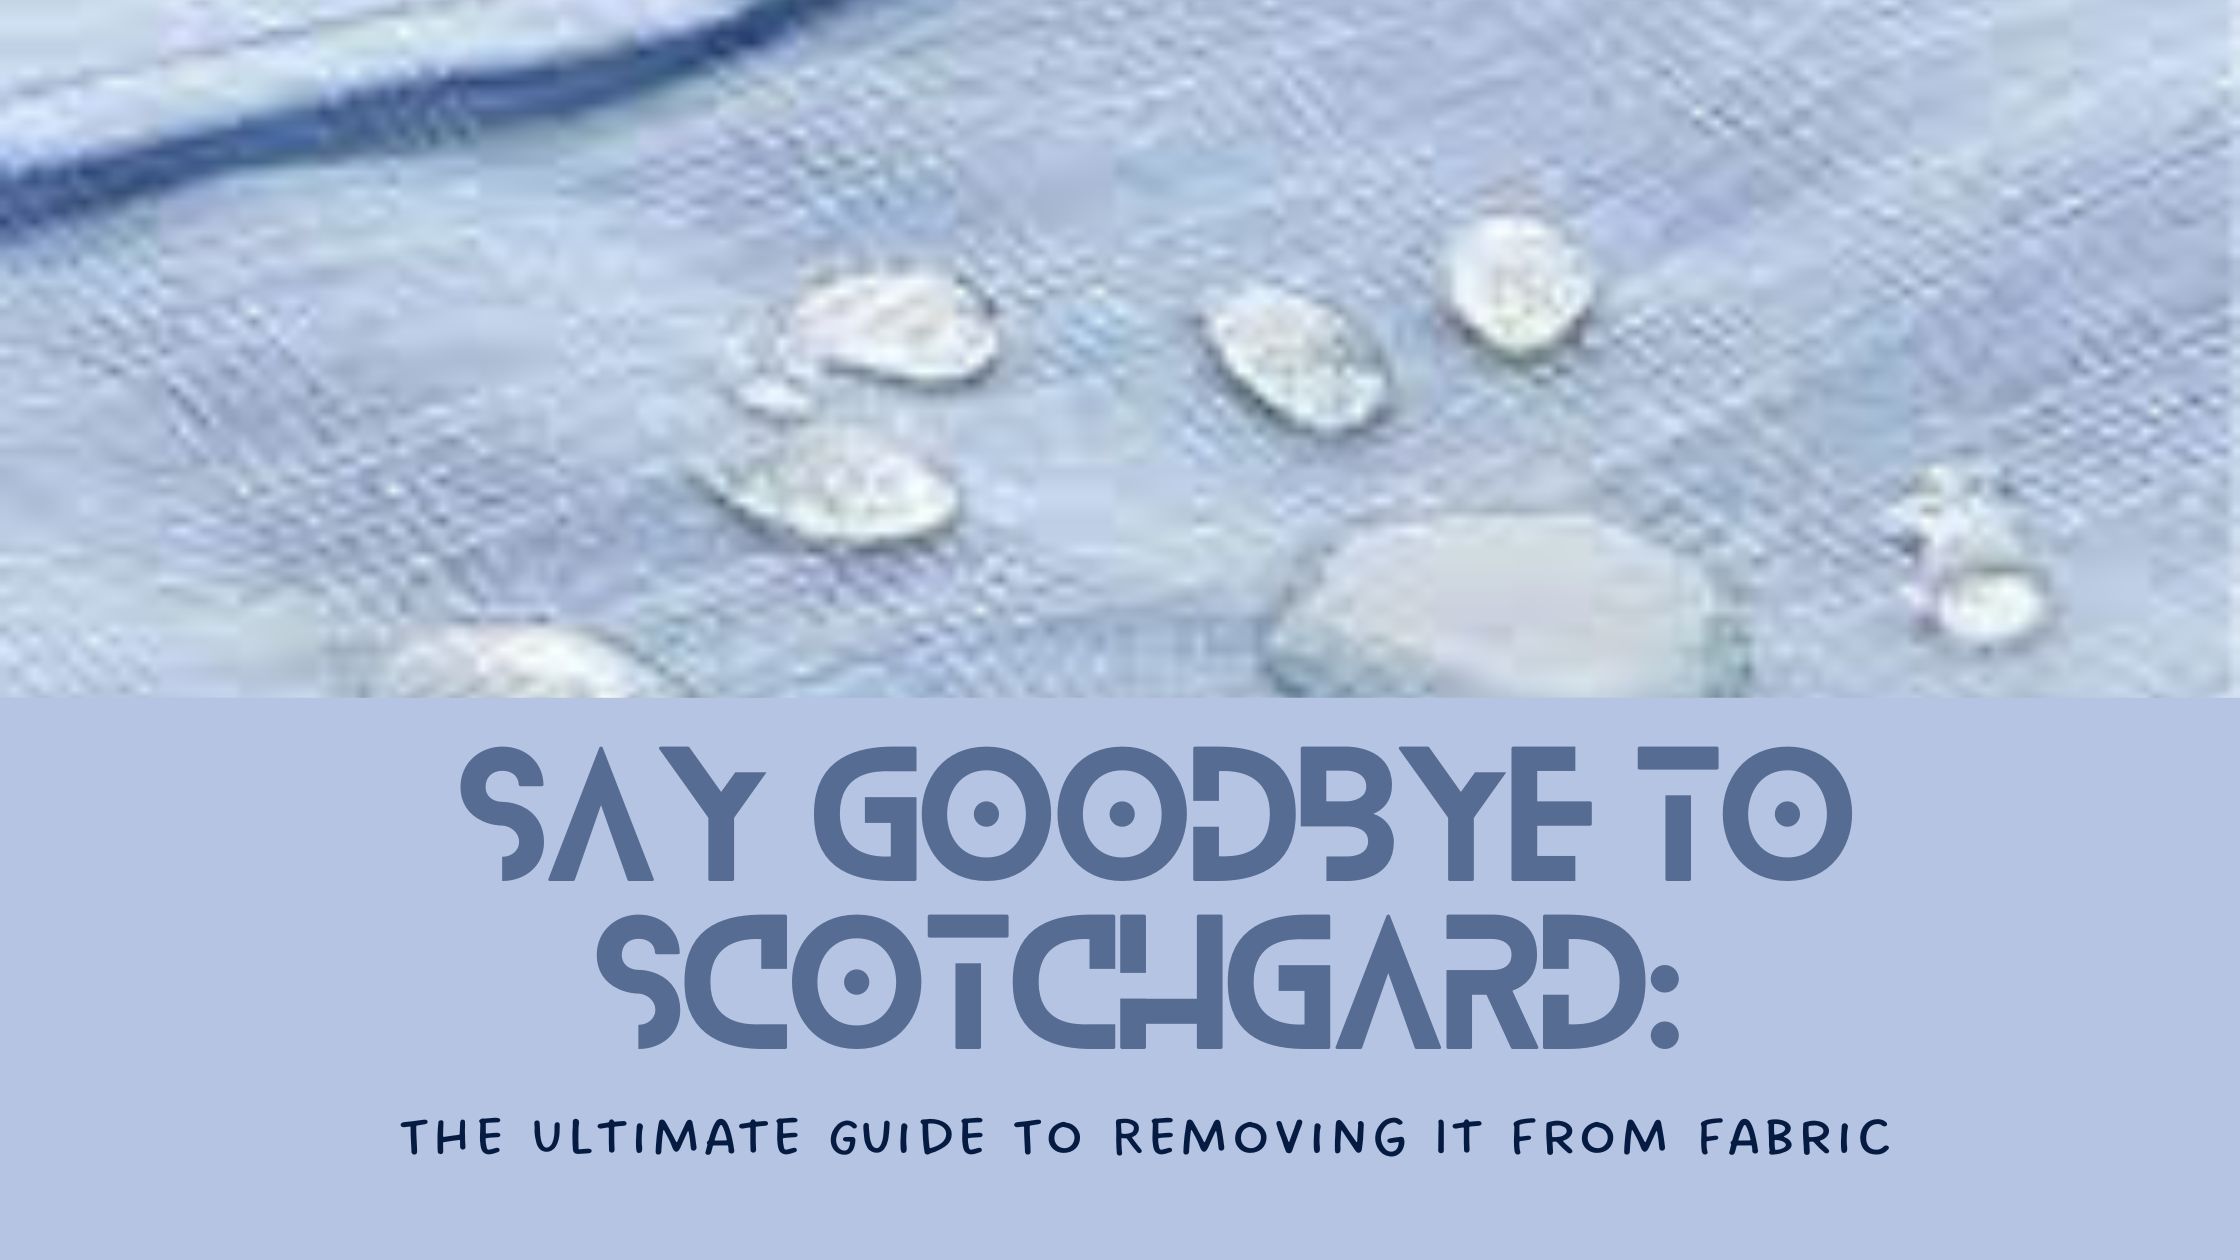 How To Remove Scotchgard From Fabric